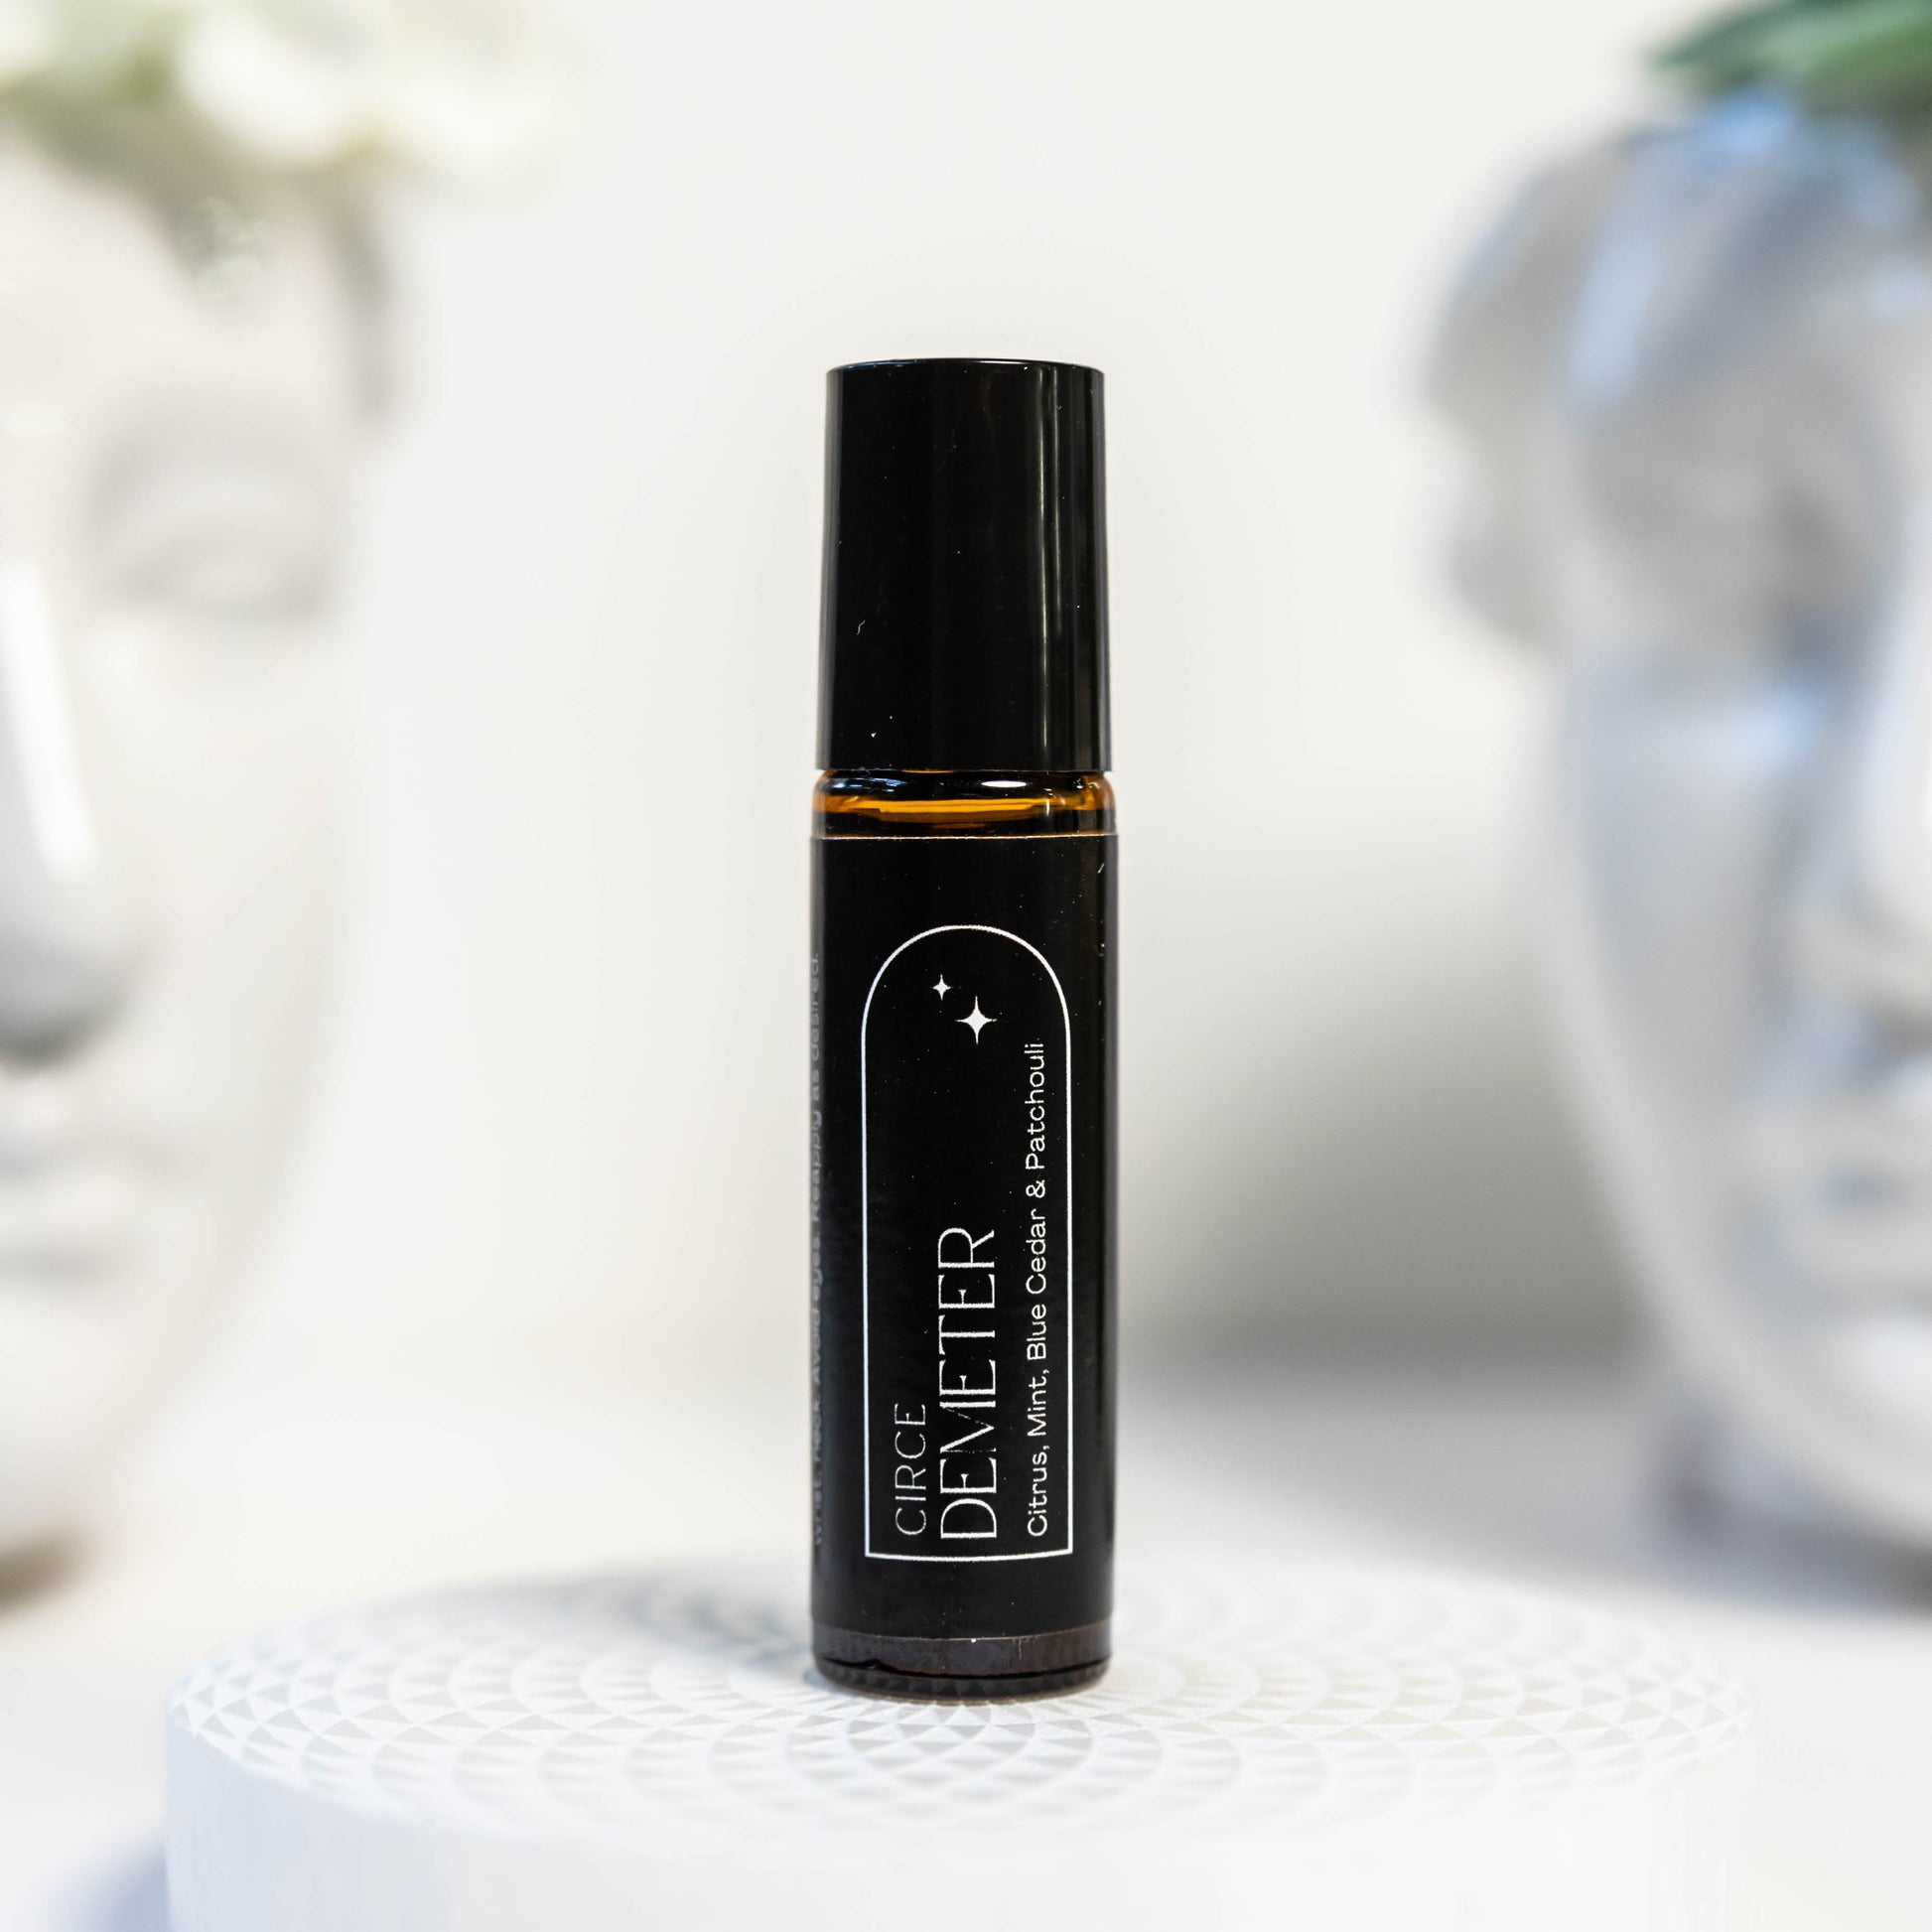 Demeter Perfume Oil Roller (Unisex) by CIRCE  from Circe Boutique